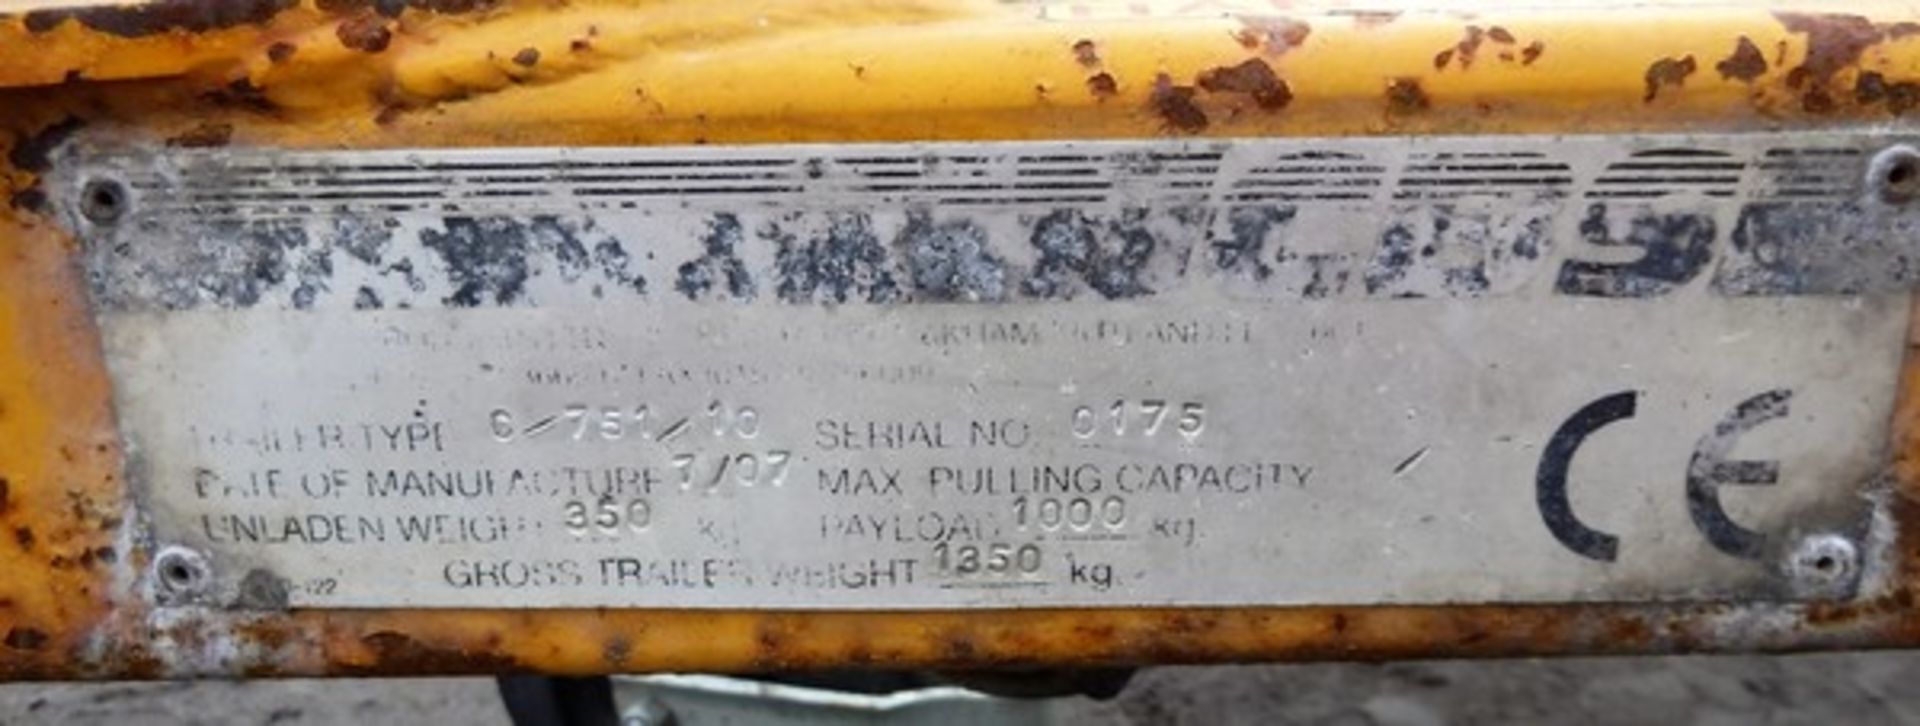 CDS CABLE REAL TRAILER, TYPE G7510, ASSET NO 758-7008 - Image 8 of 12